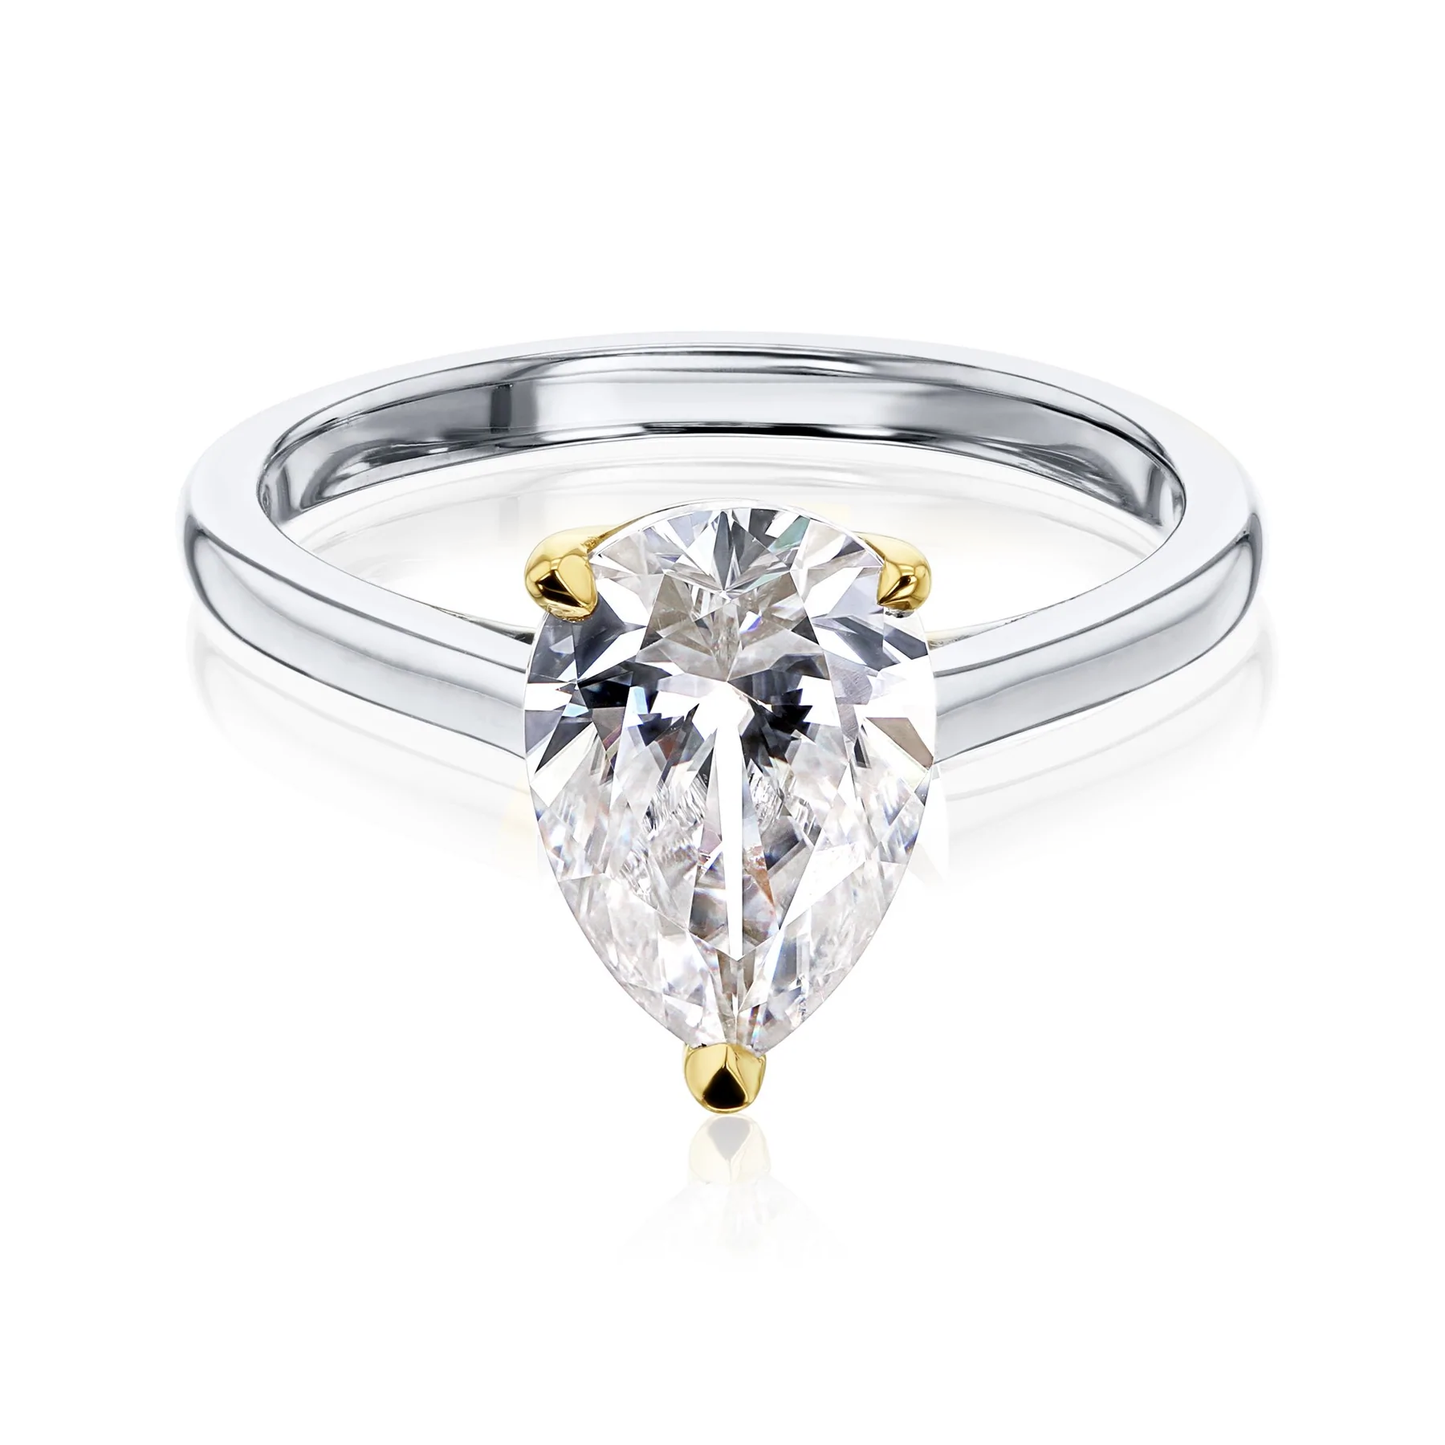 18K White Gold Engagement Ring Pear 0.51ct Natural VS2 H with 13 sidestones 0.06ct